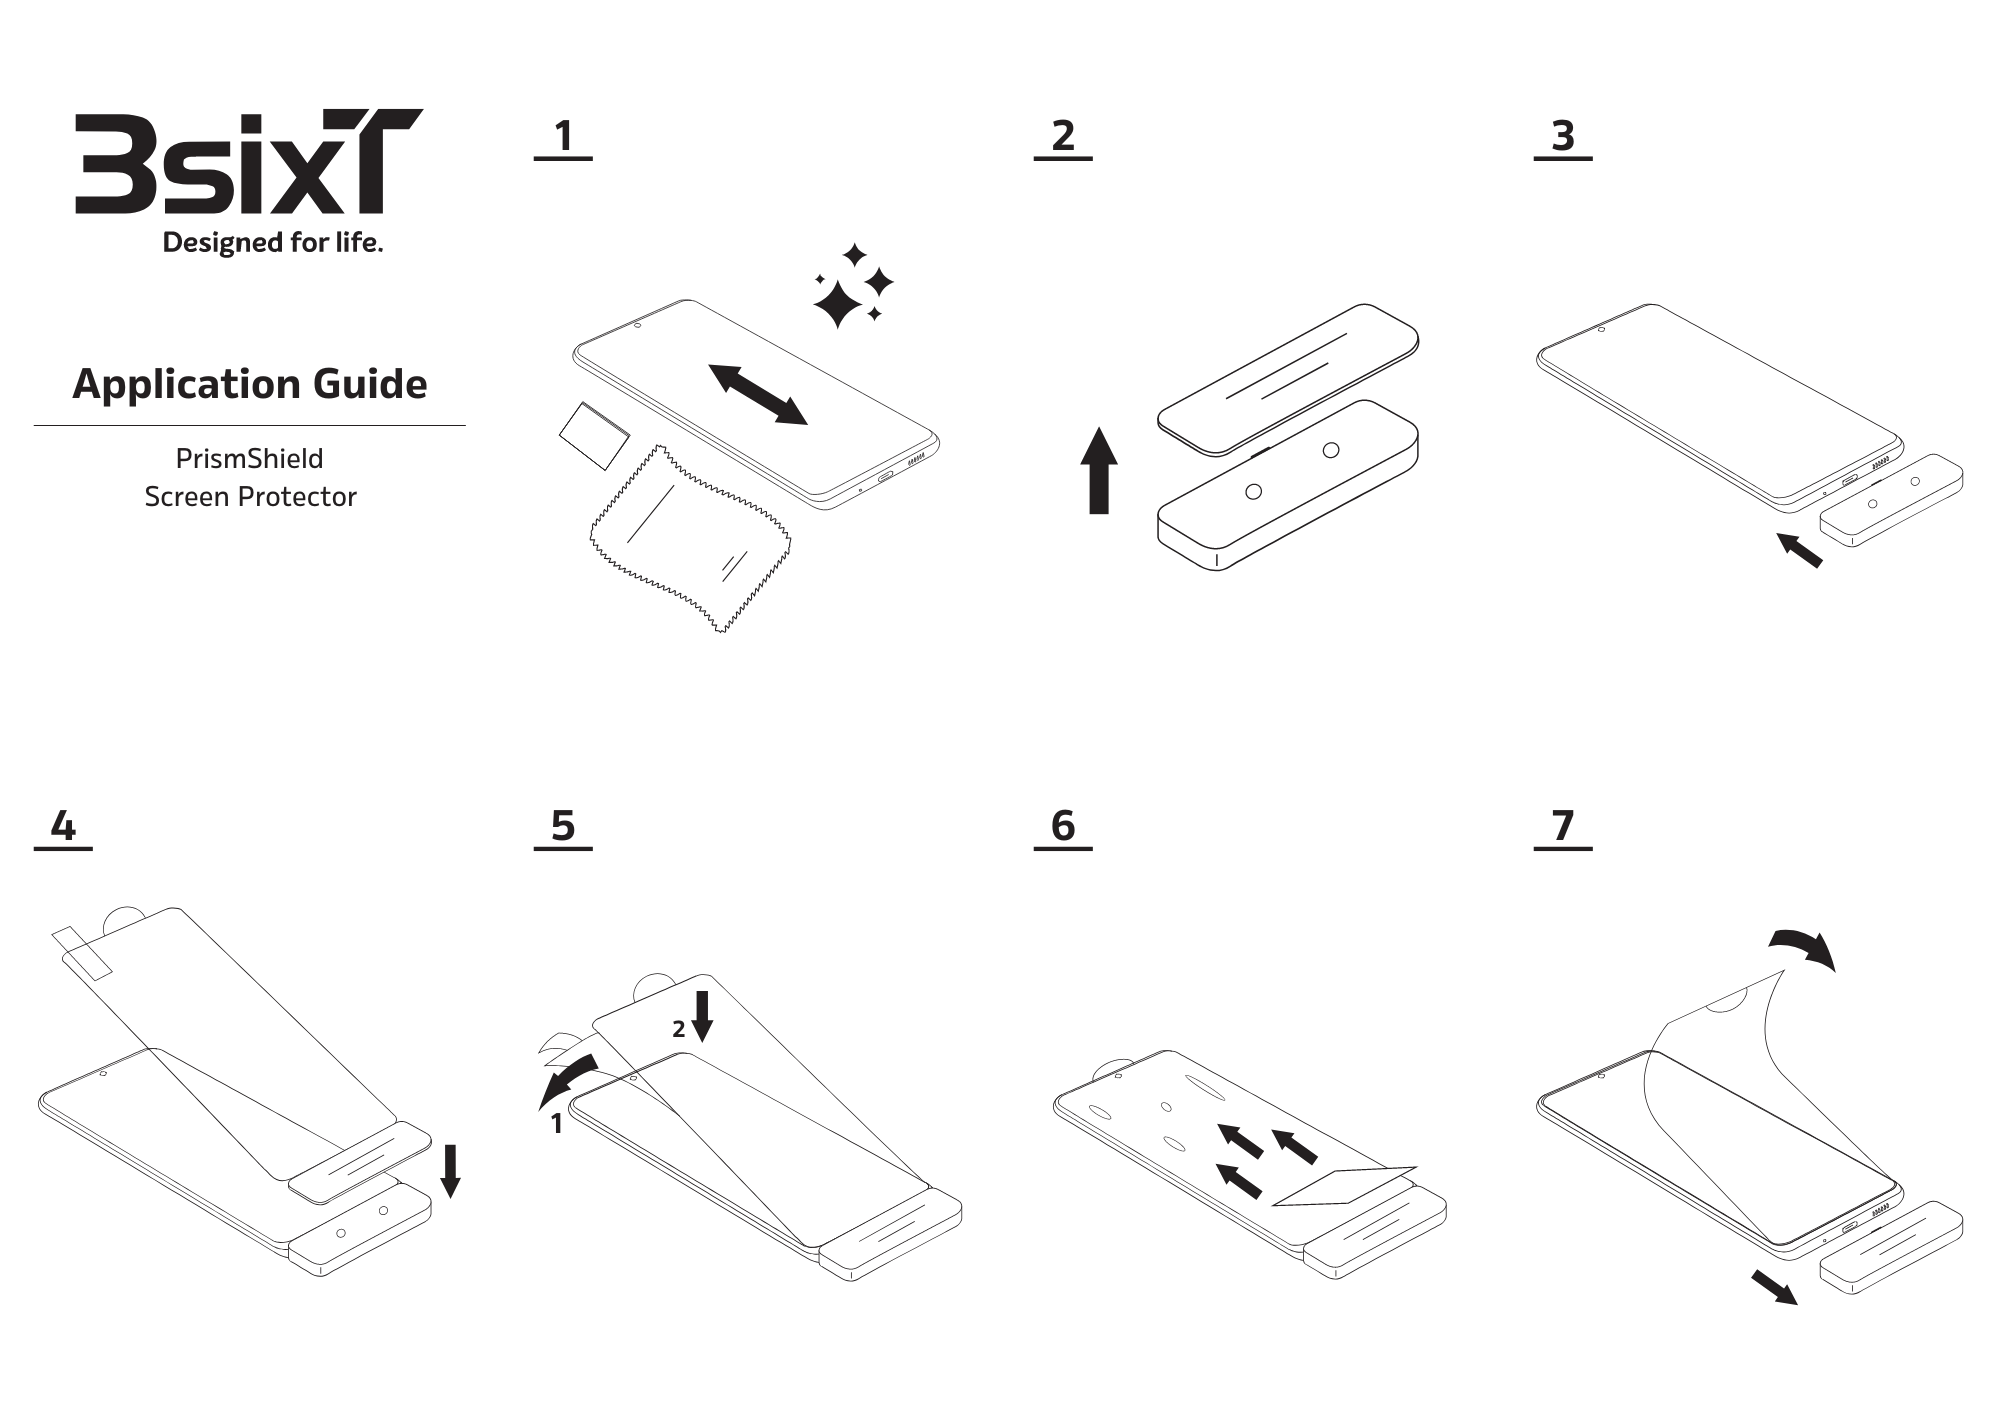 3SIXT PrismShield Screen Protector - Application Guide.png